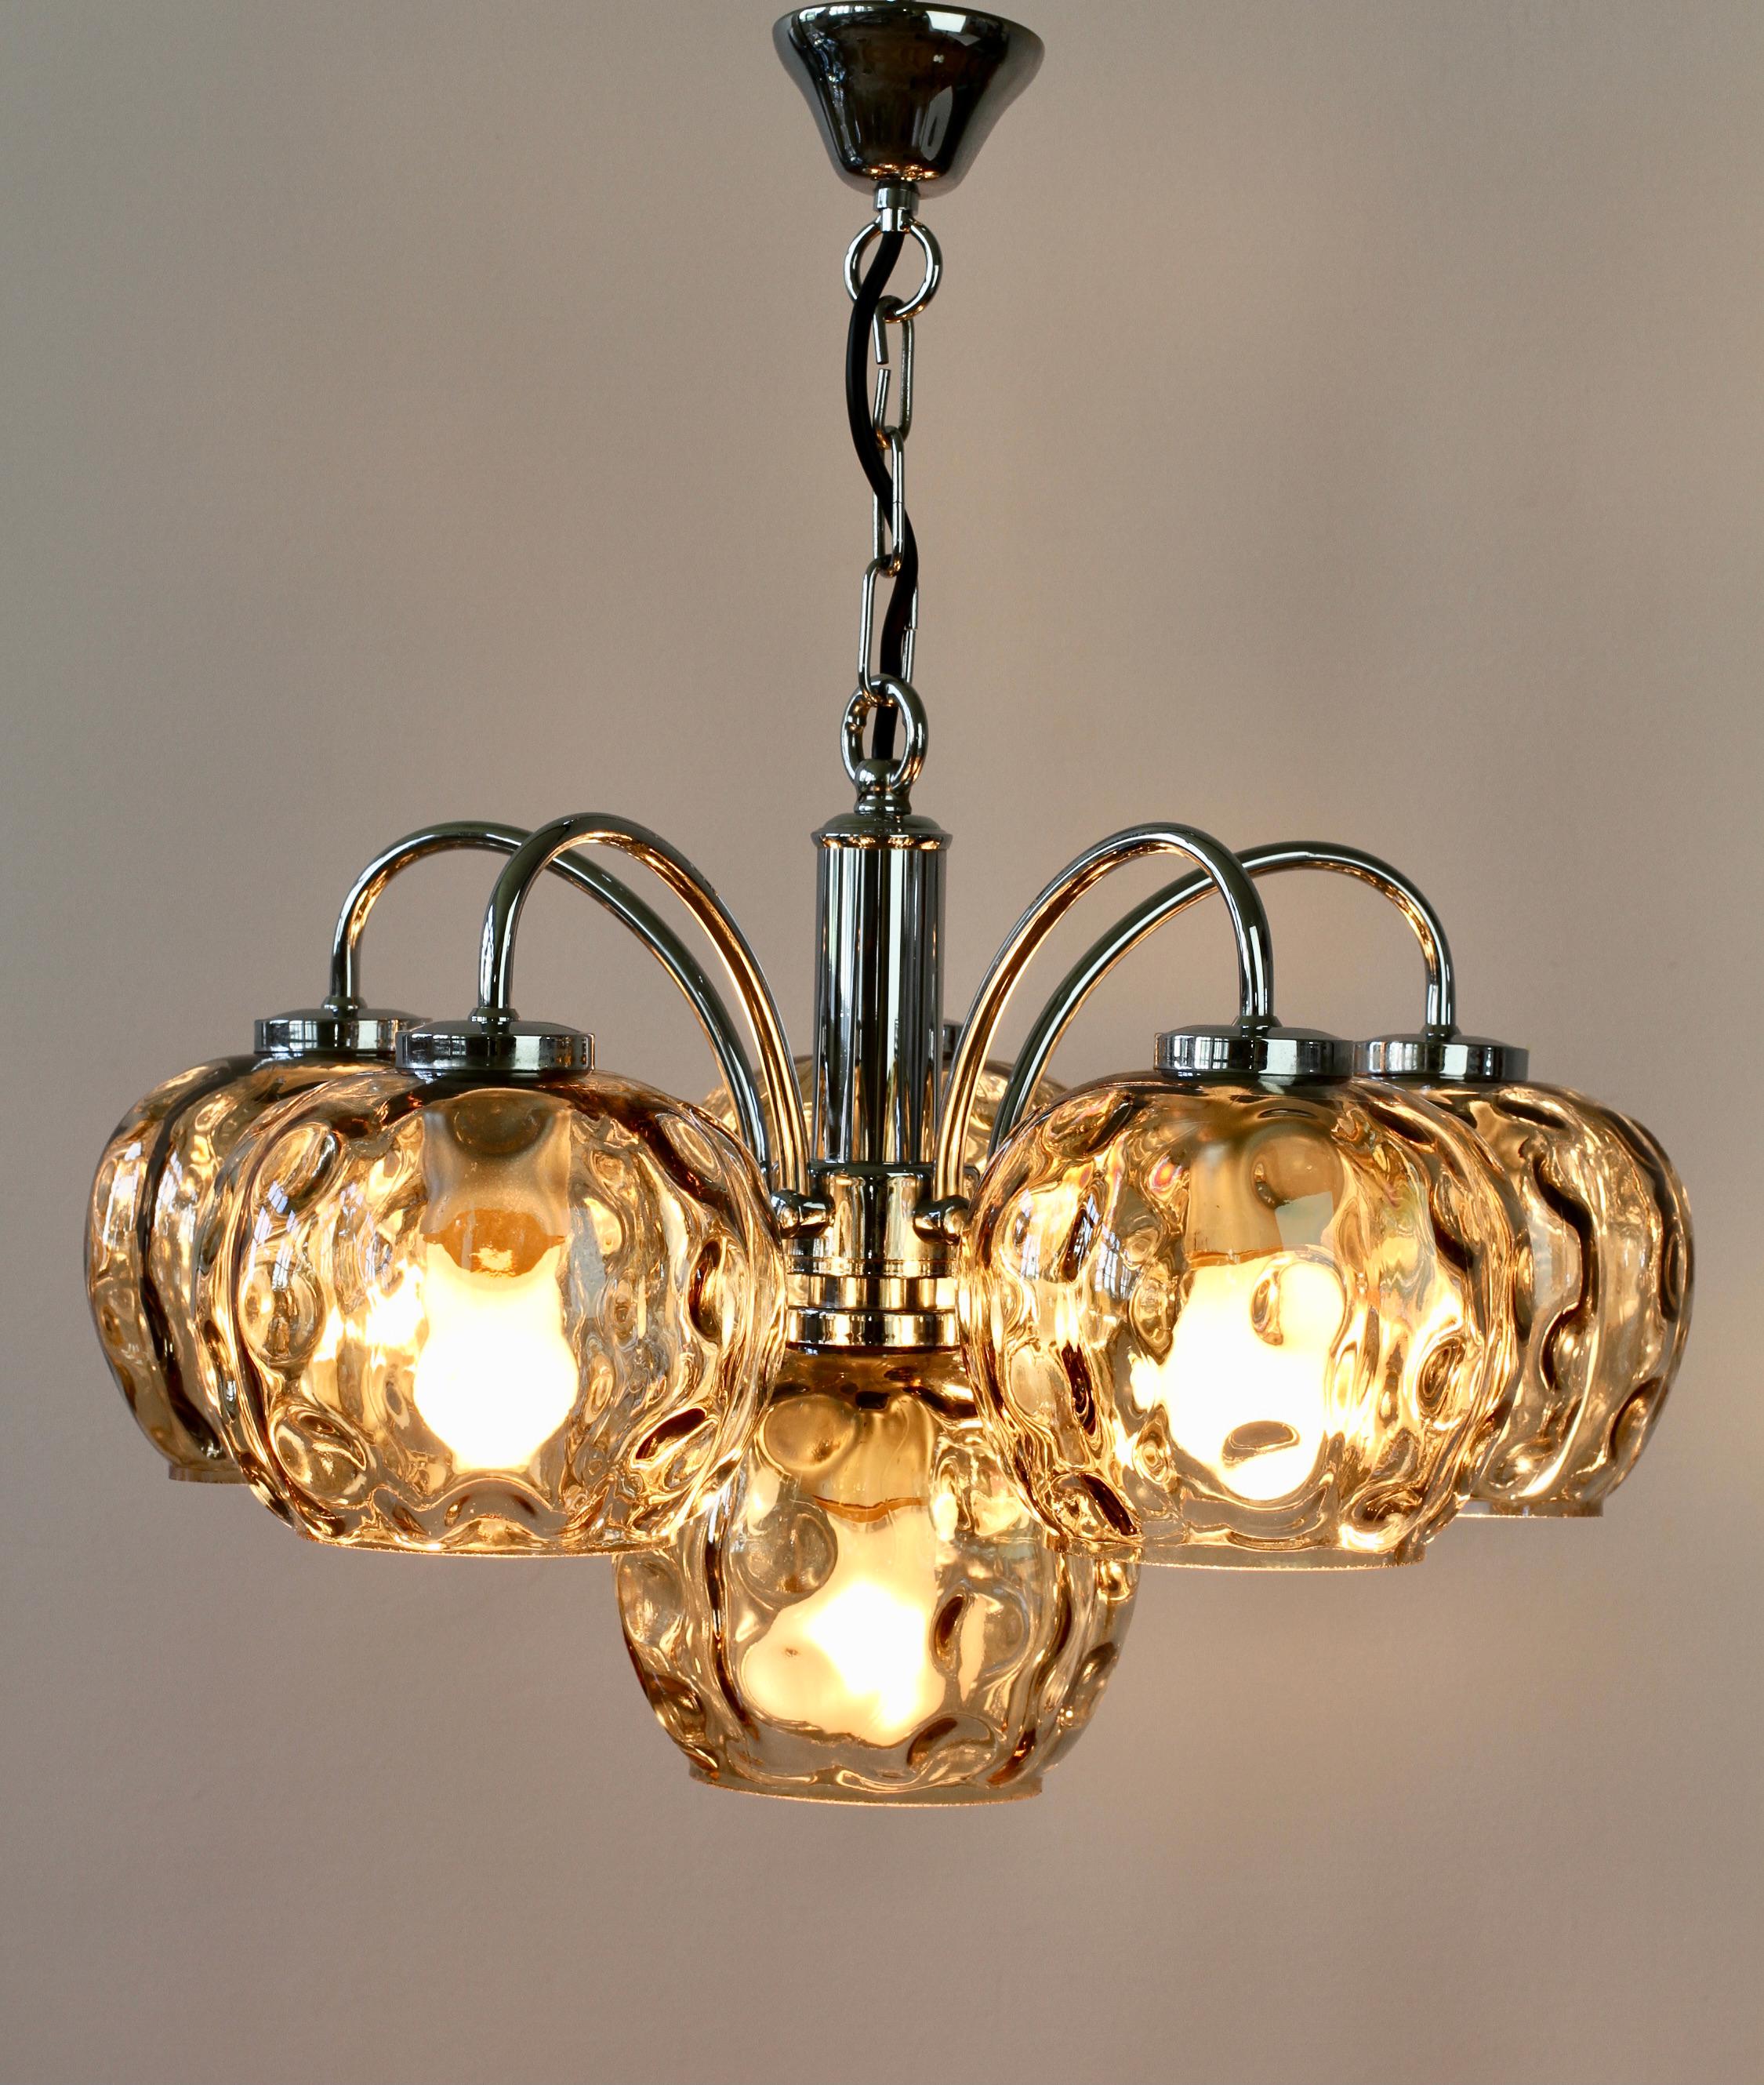 Beautiful six-arm Limburg style, German made chandelier by WoFi Leuchten, circa 1970. This elegant piece sits perfectly within the mid-century style with it's polished chrome plated metalwork and opulent glass globes. 

Requires six standard E27